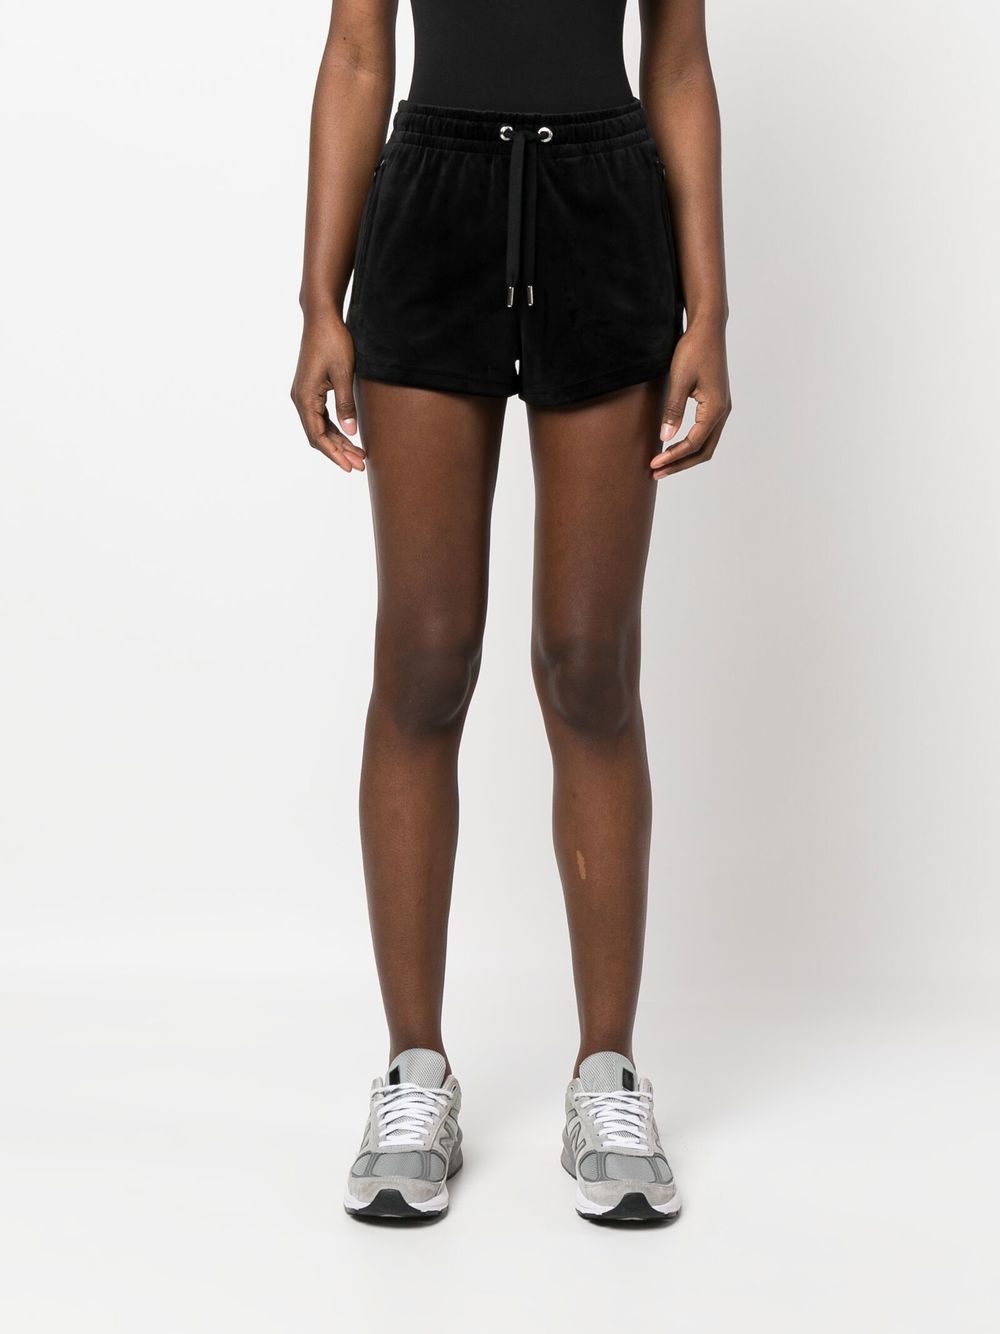 Juicy Couture JUICY COUTURE- Tamia Rhinestone Logo Shorts